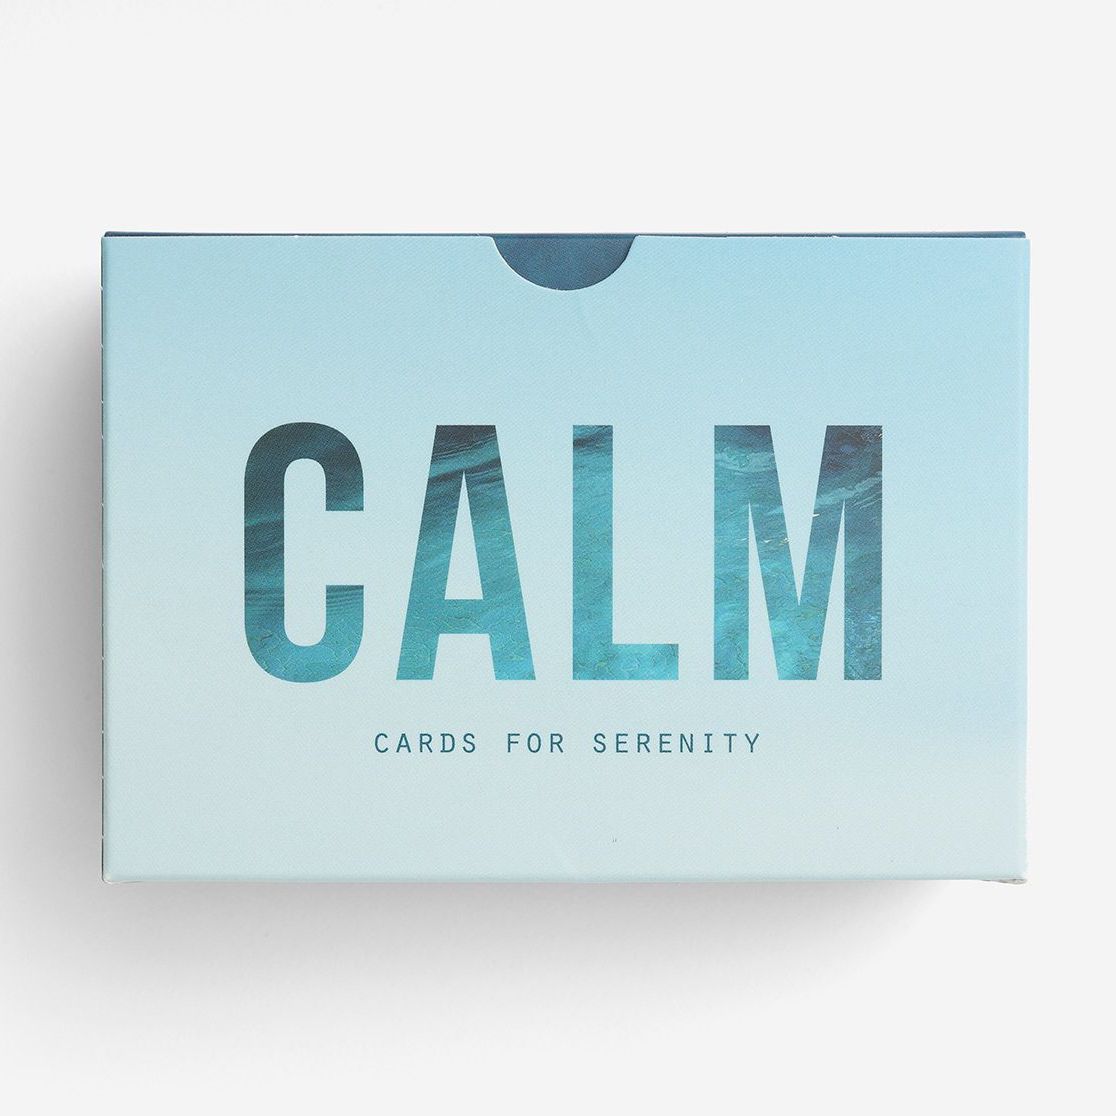 Calm Cards for Serenity